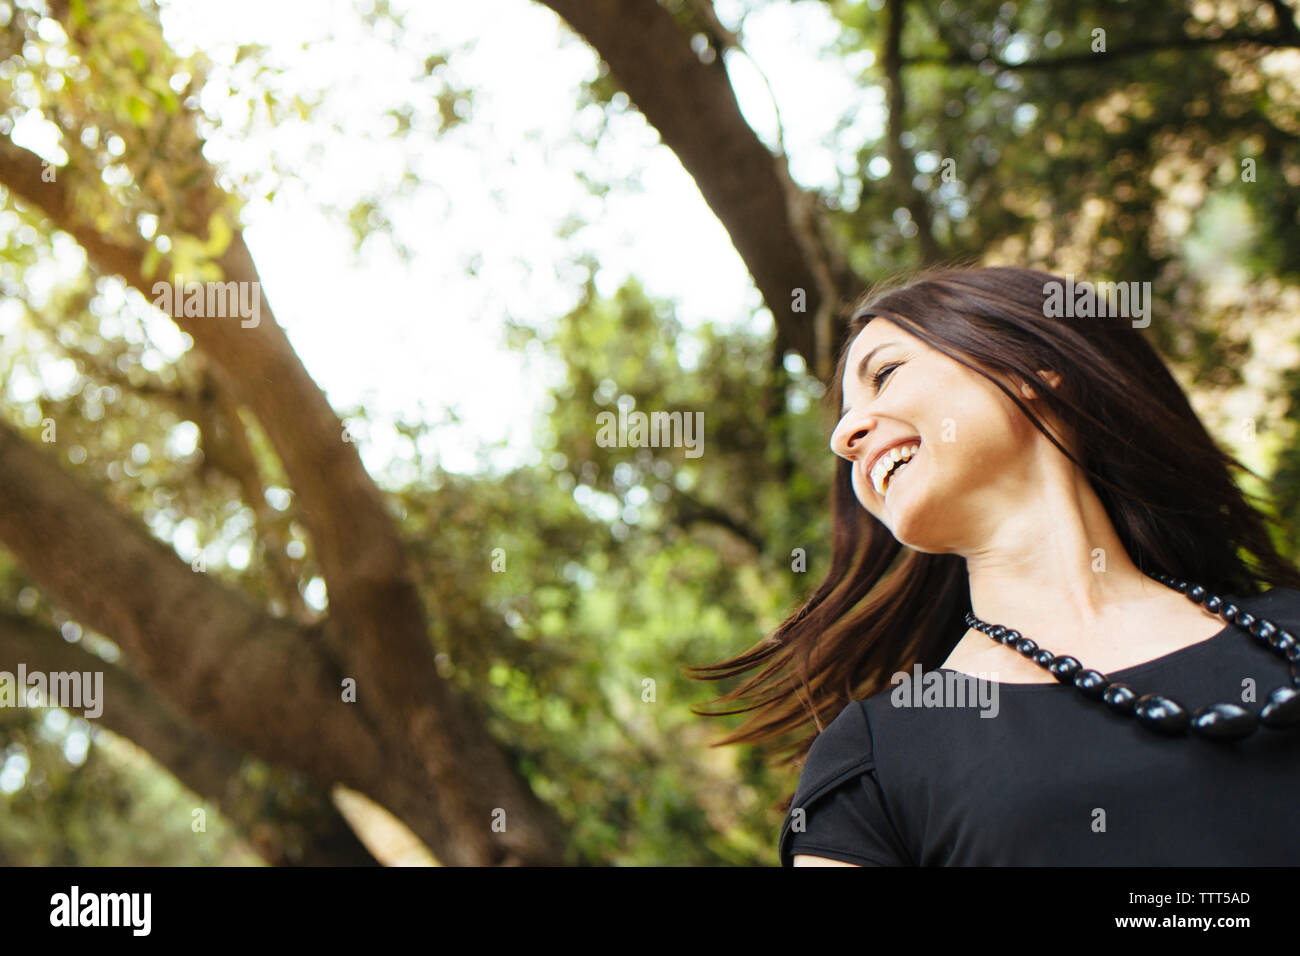 Close-up of cheerful woman tossing cheveux en forêt Banque D'Images